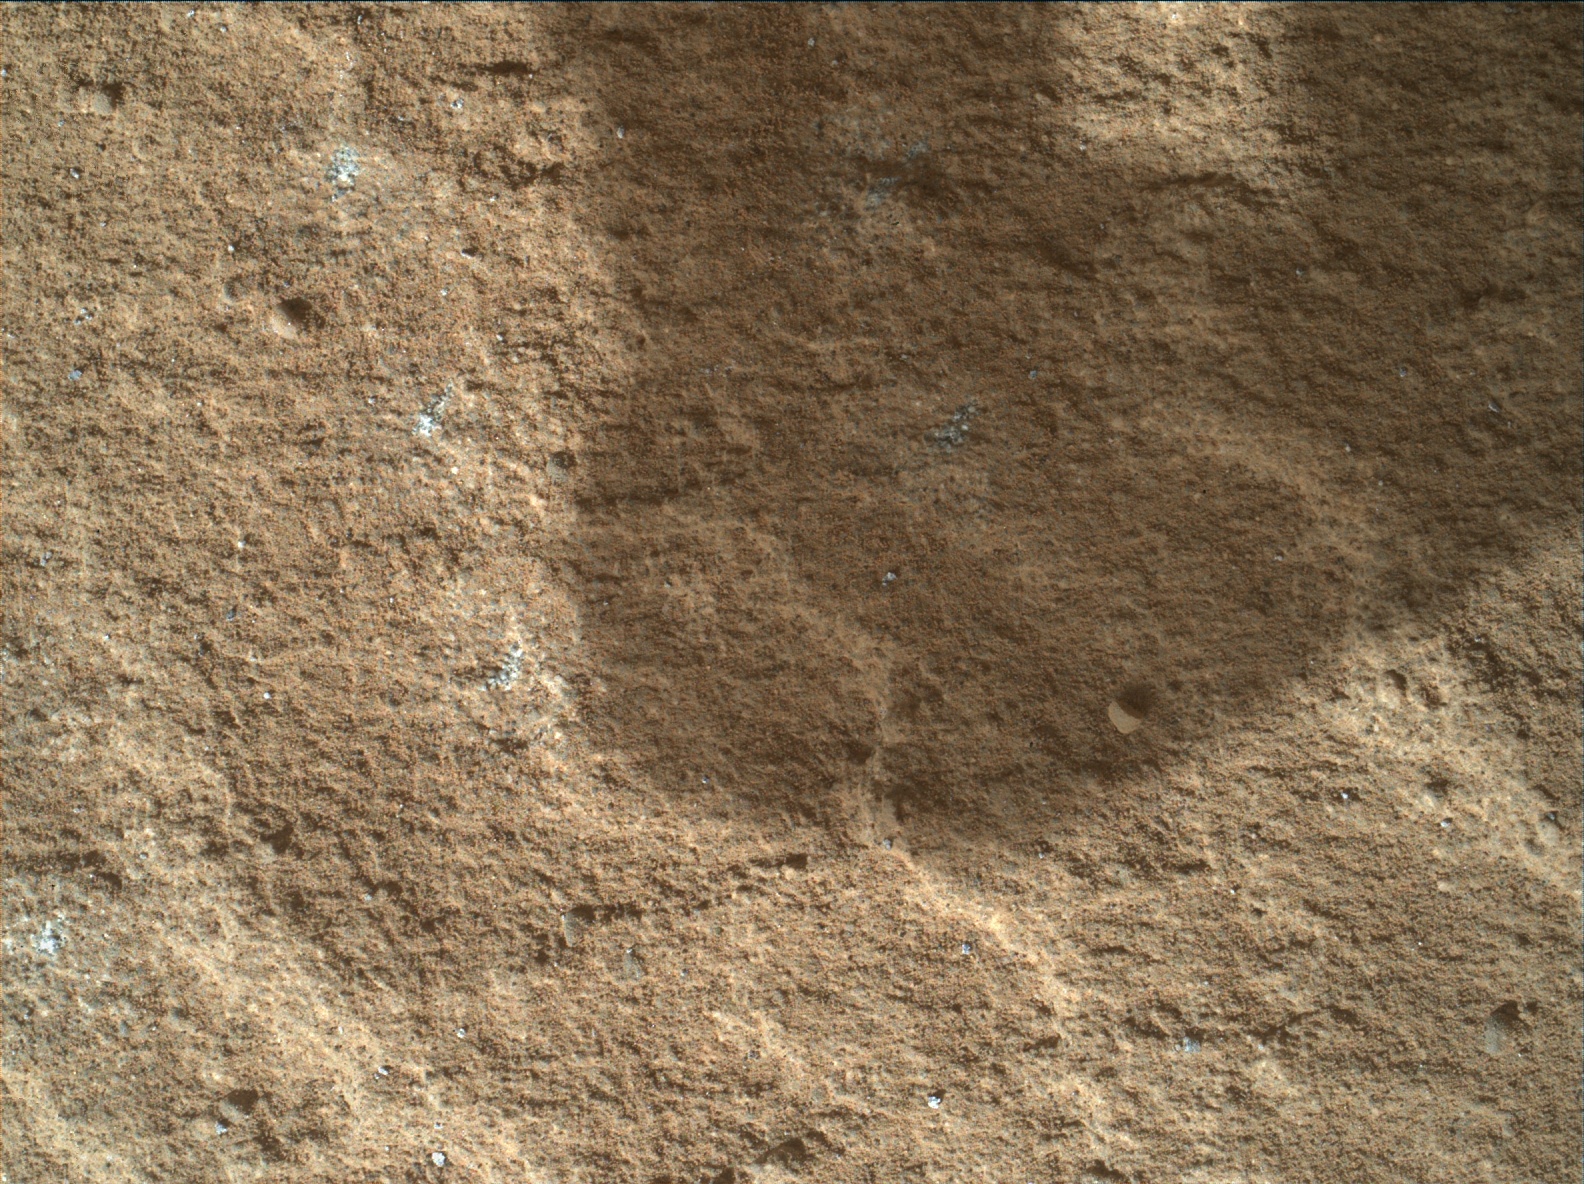 Nasa's Mars rover Curiosity acquired this image using its Mars Hand Lens Imager (MAHLI) on Sol 1144